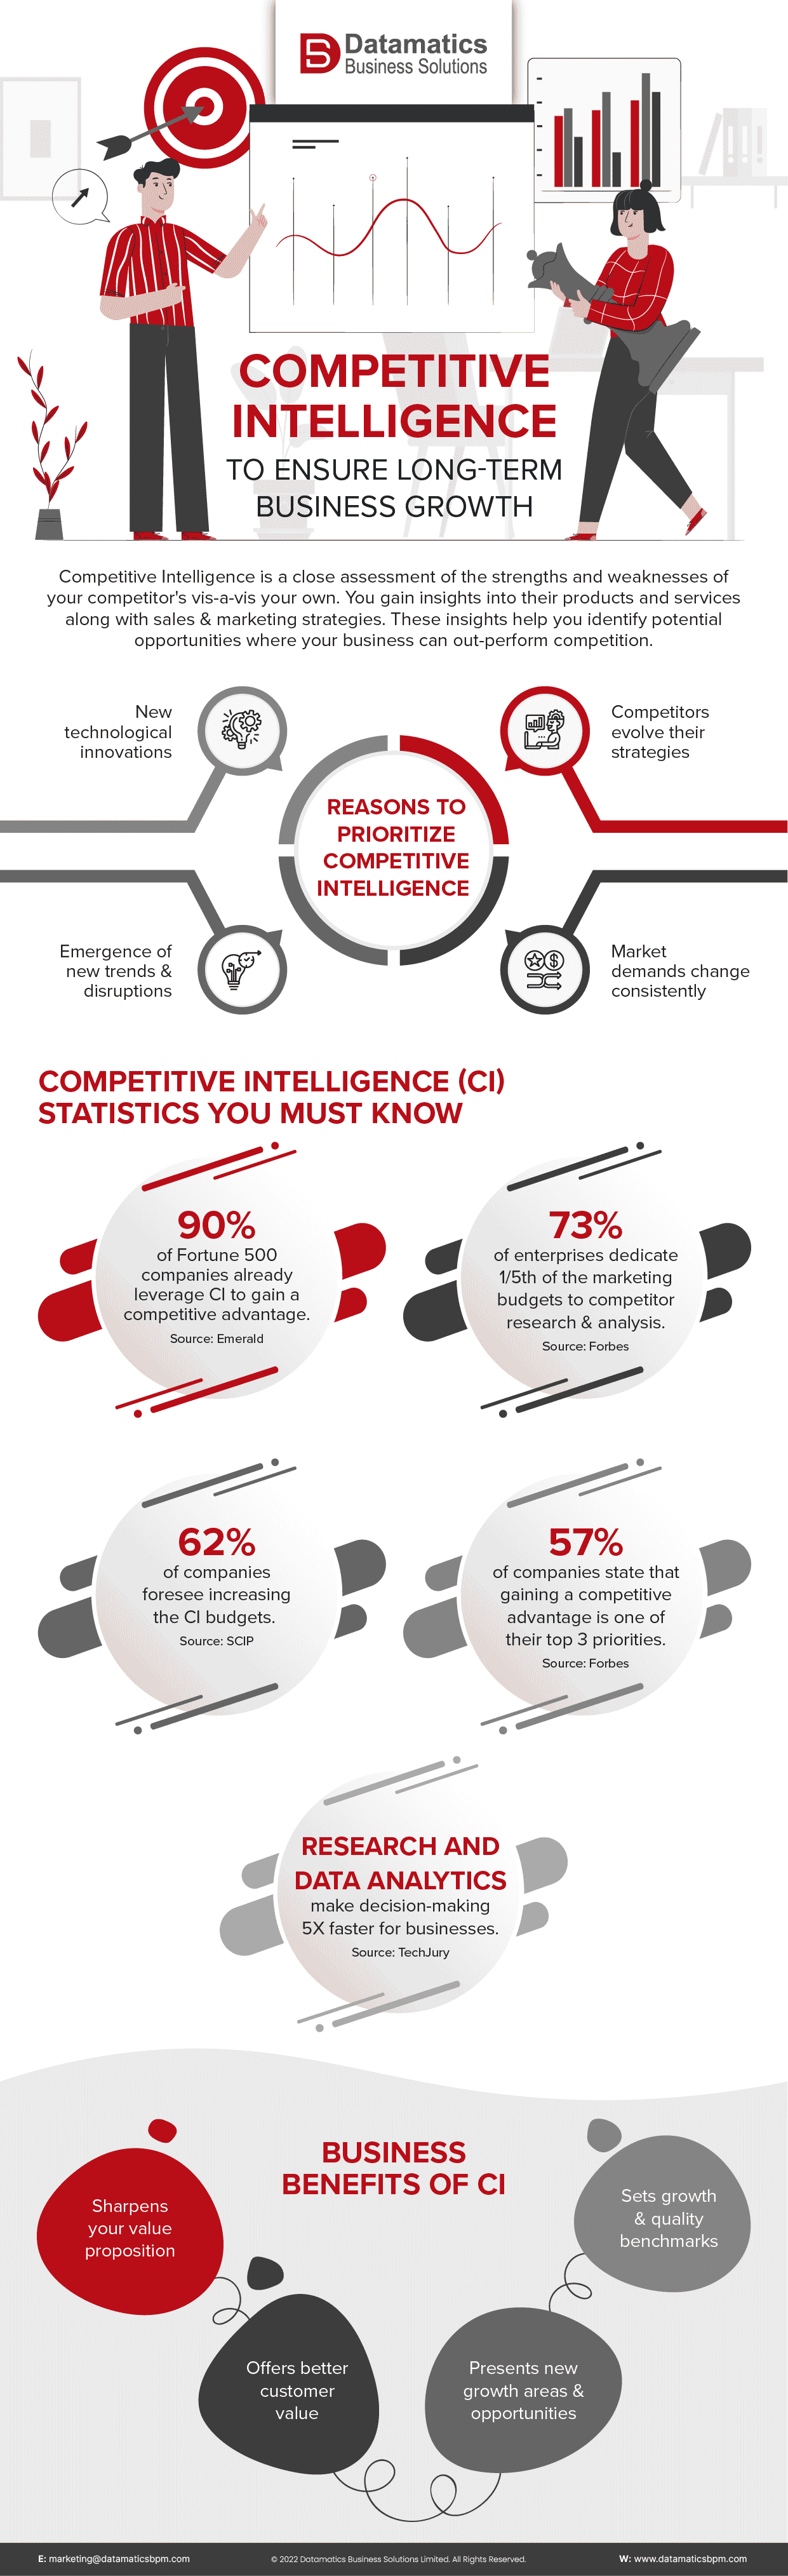 Competitive Intelligence for Long-Term Business Growth